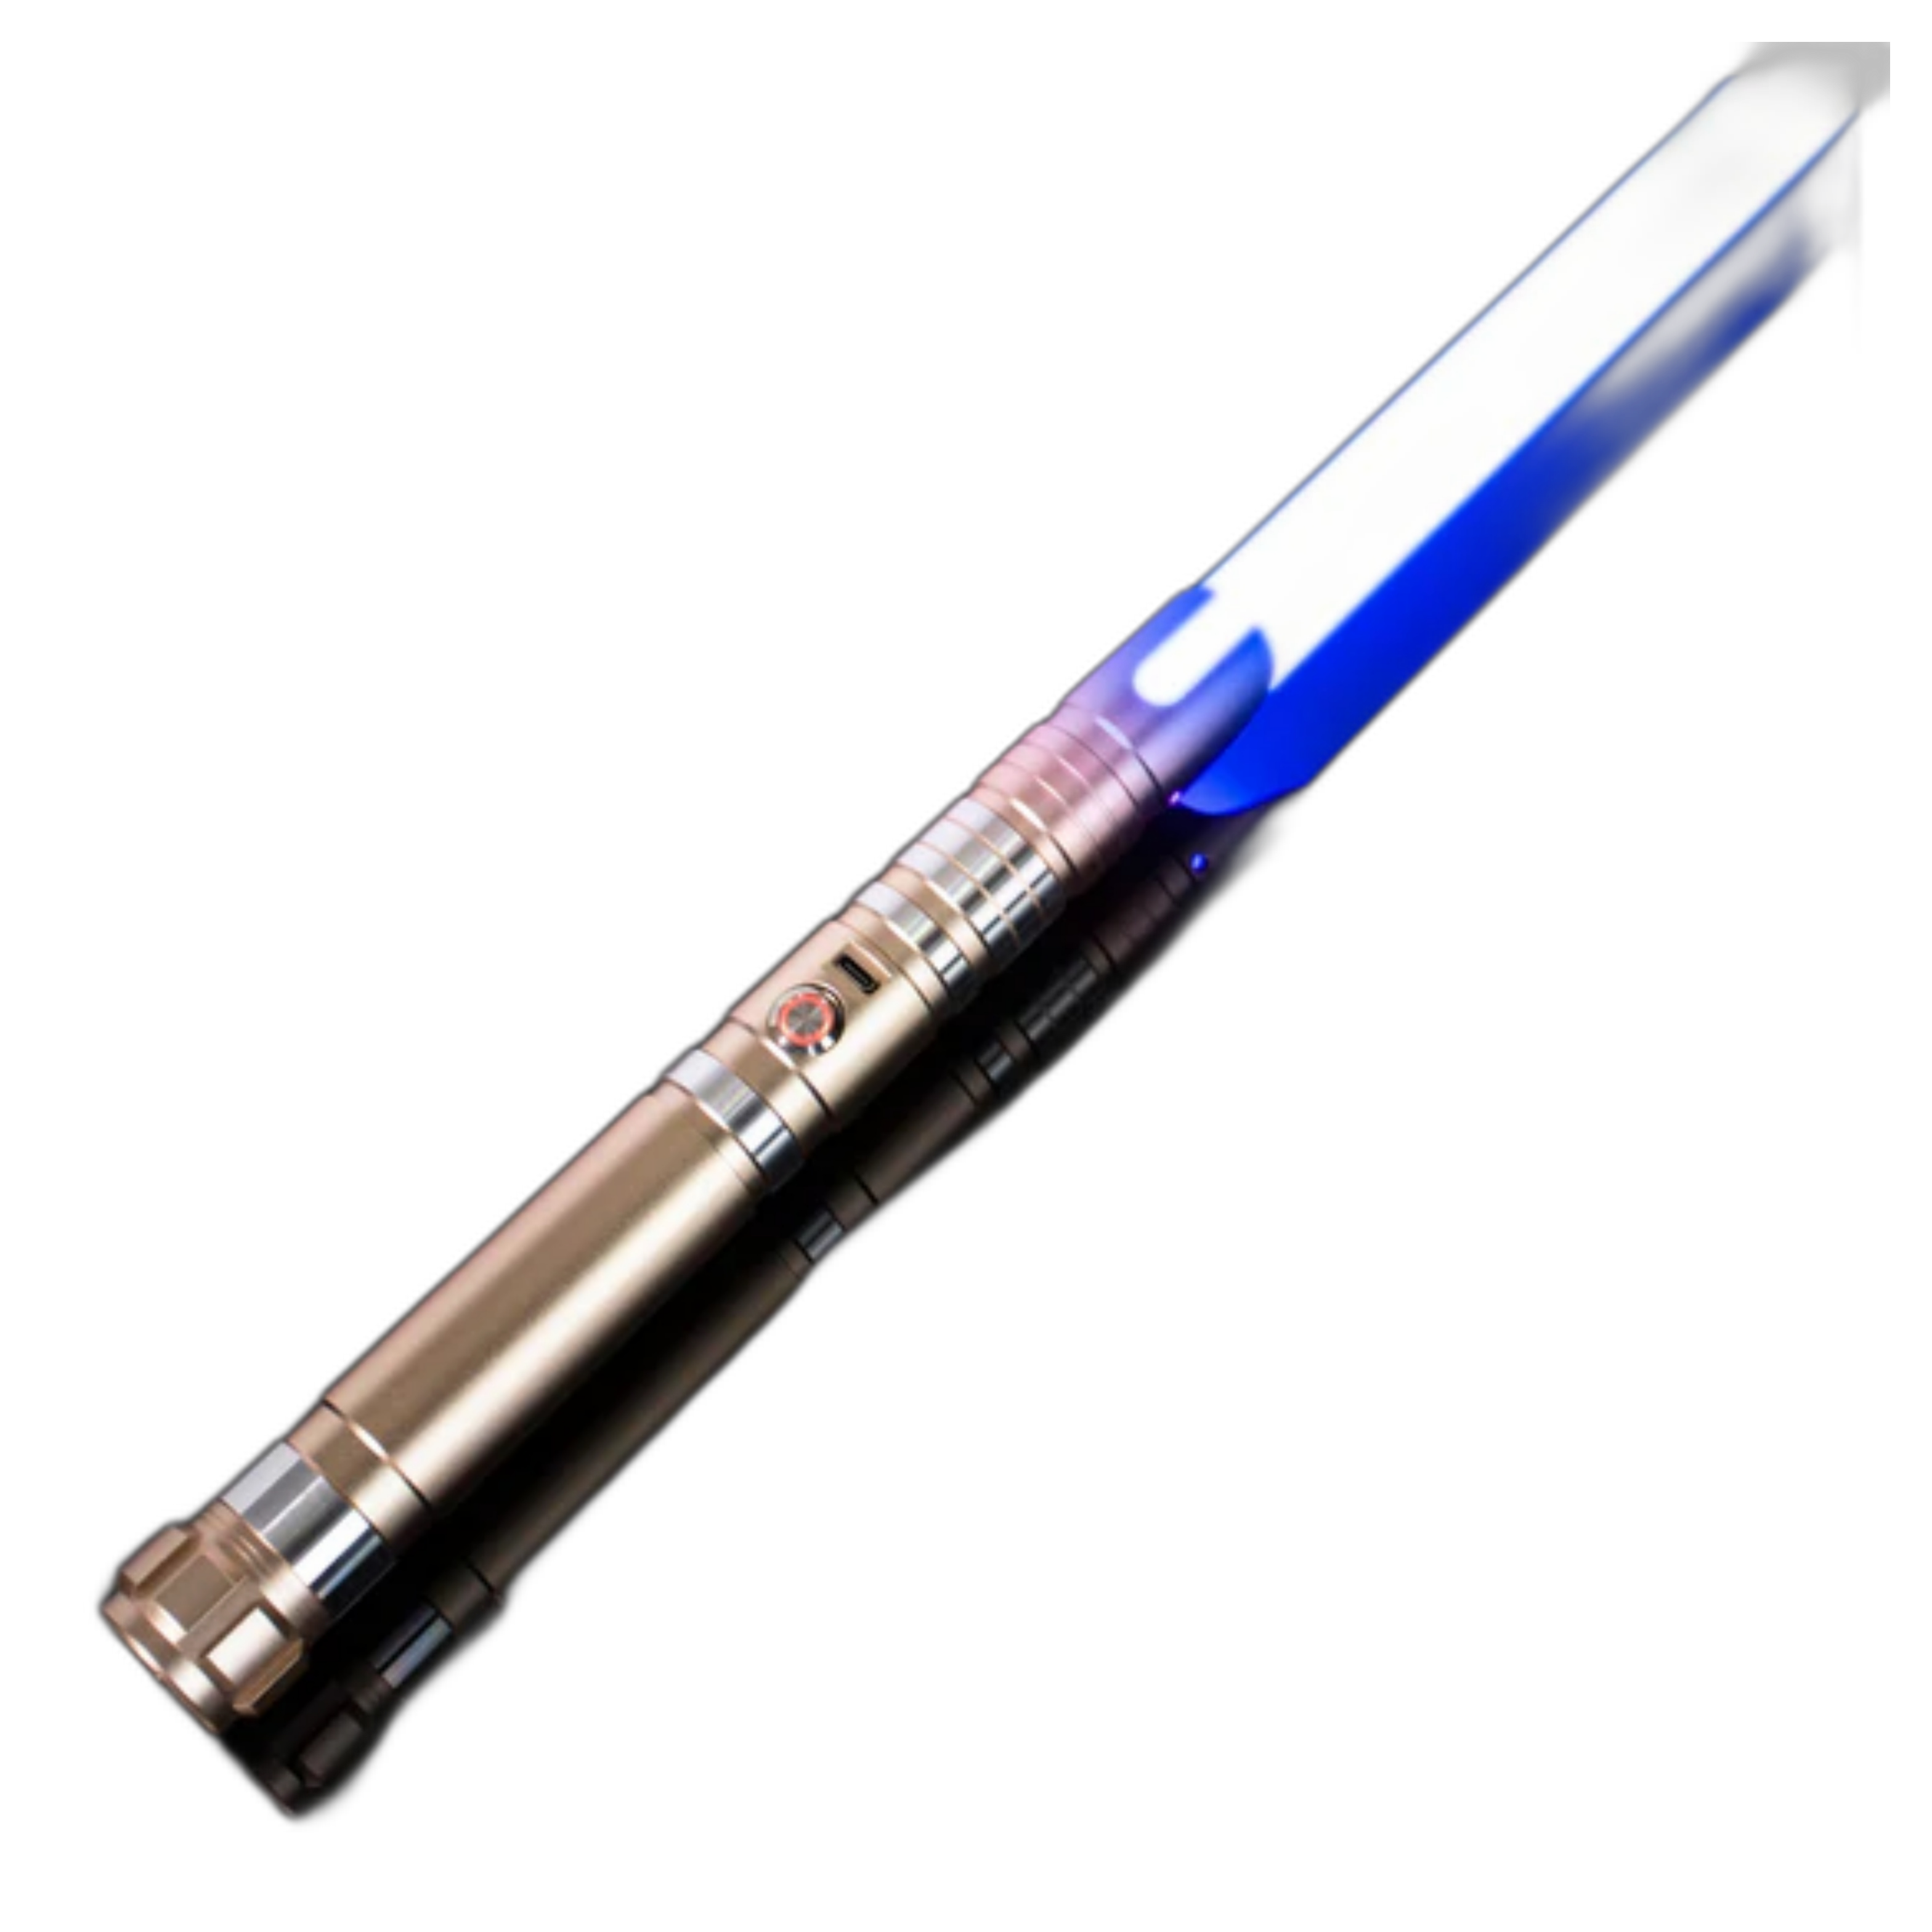 Star Wars stunt saber from Saber Theory, in the type Knight | Saber. 